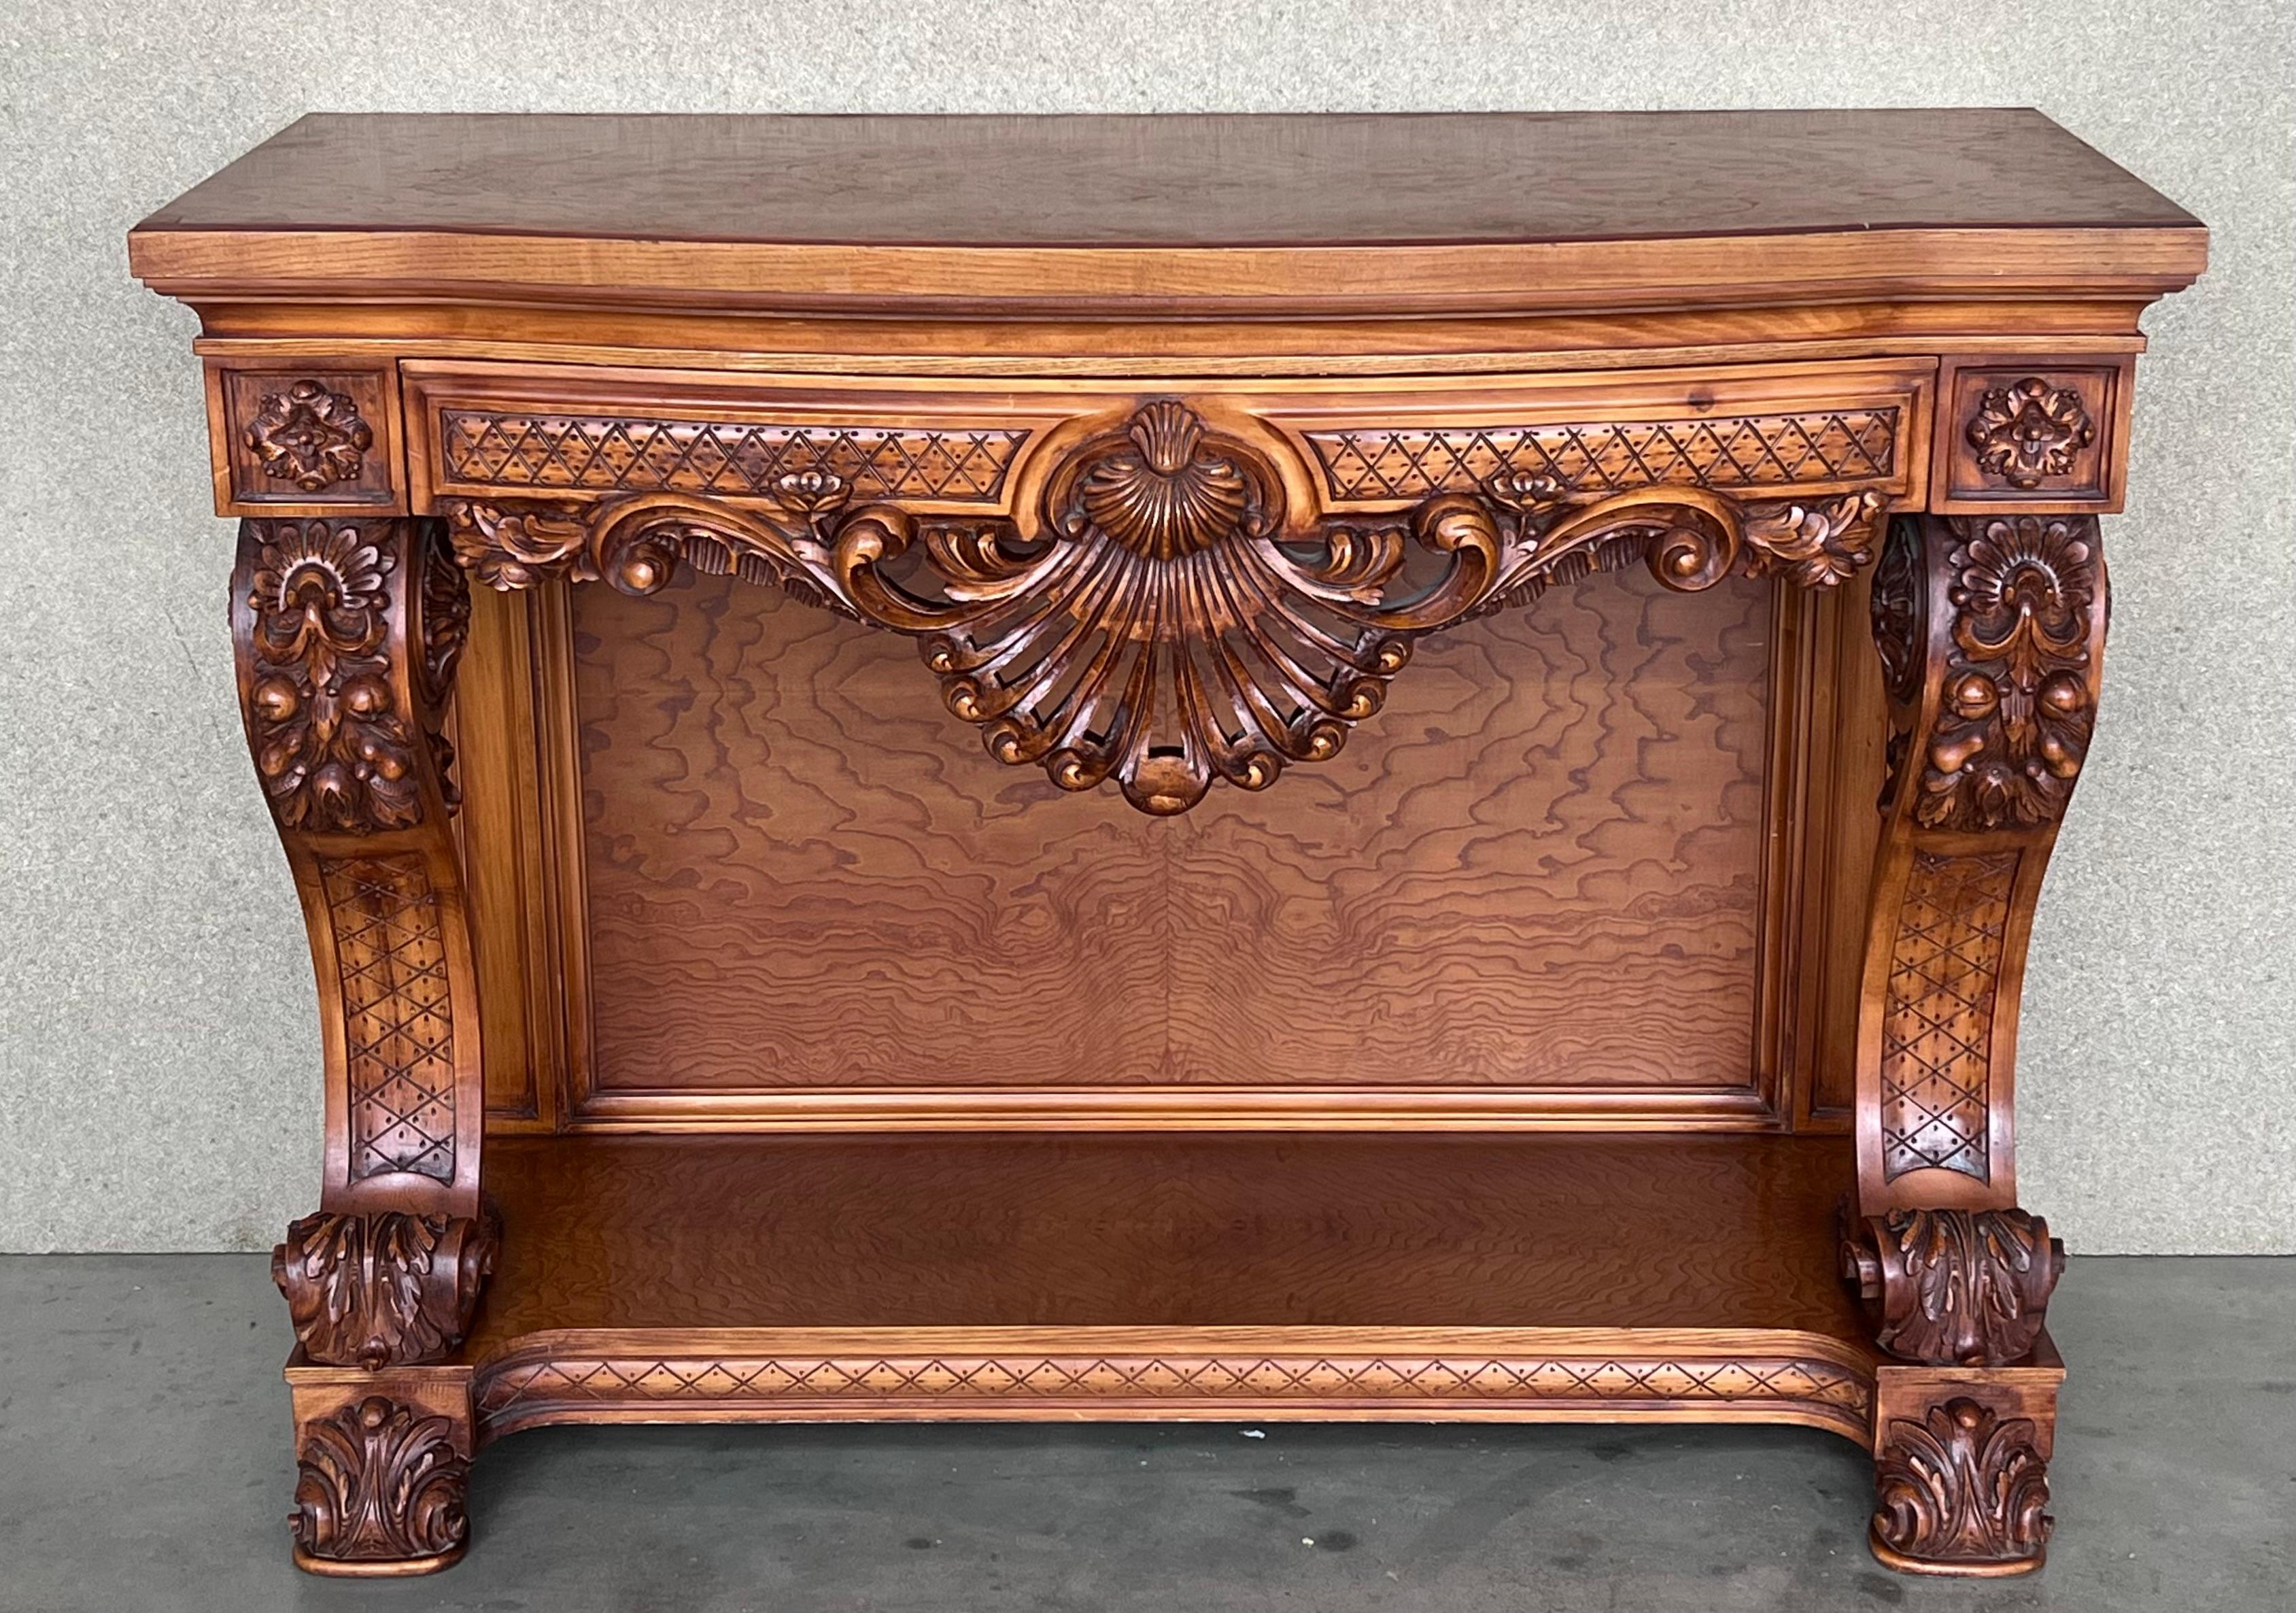 A Scandinavian mahogany early 19th century Empire table or console. This antique Swedish Biedermeier piece has a drawer with its original working key included and a bottom shelf resting on rounded feet. It is probably made in the Baltic area of